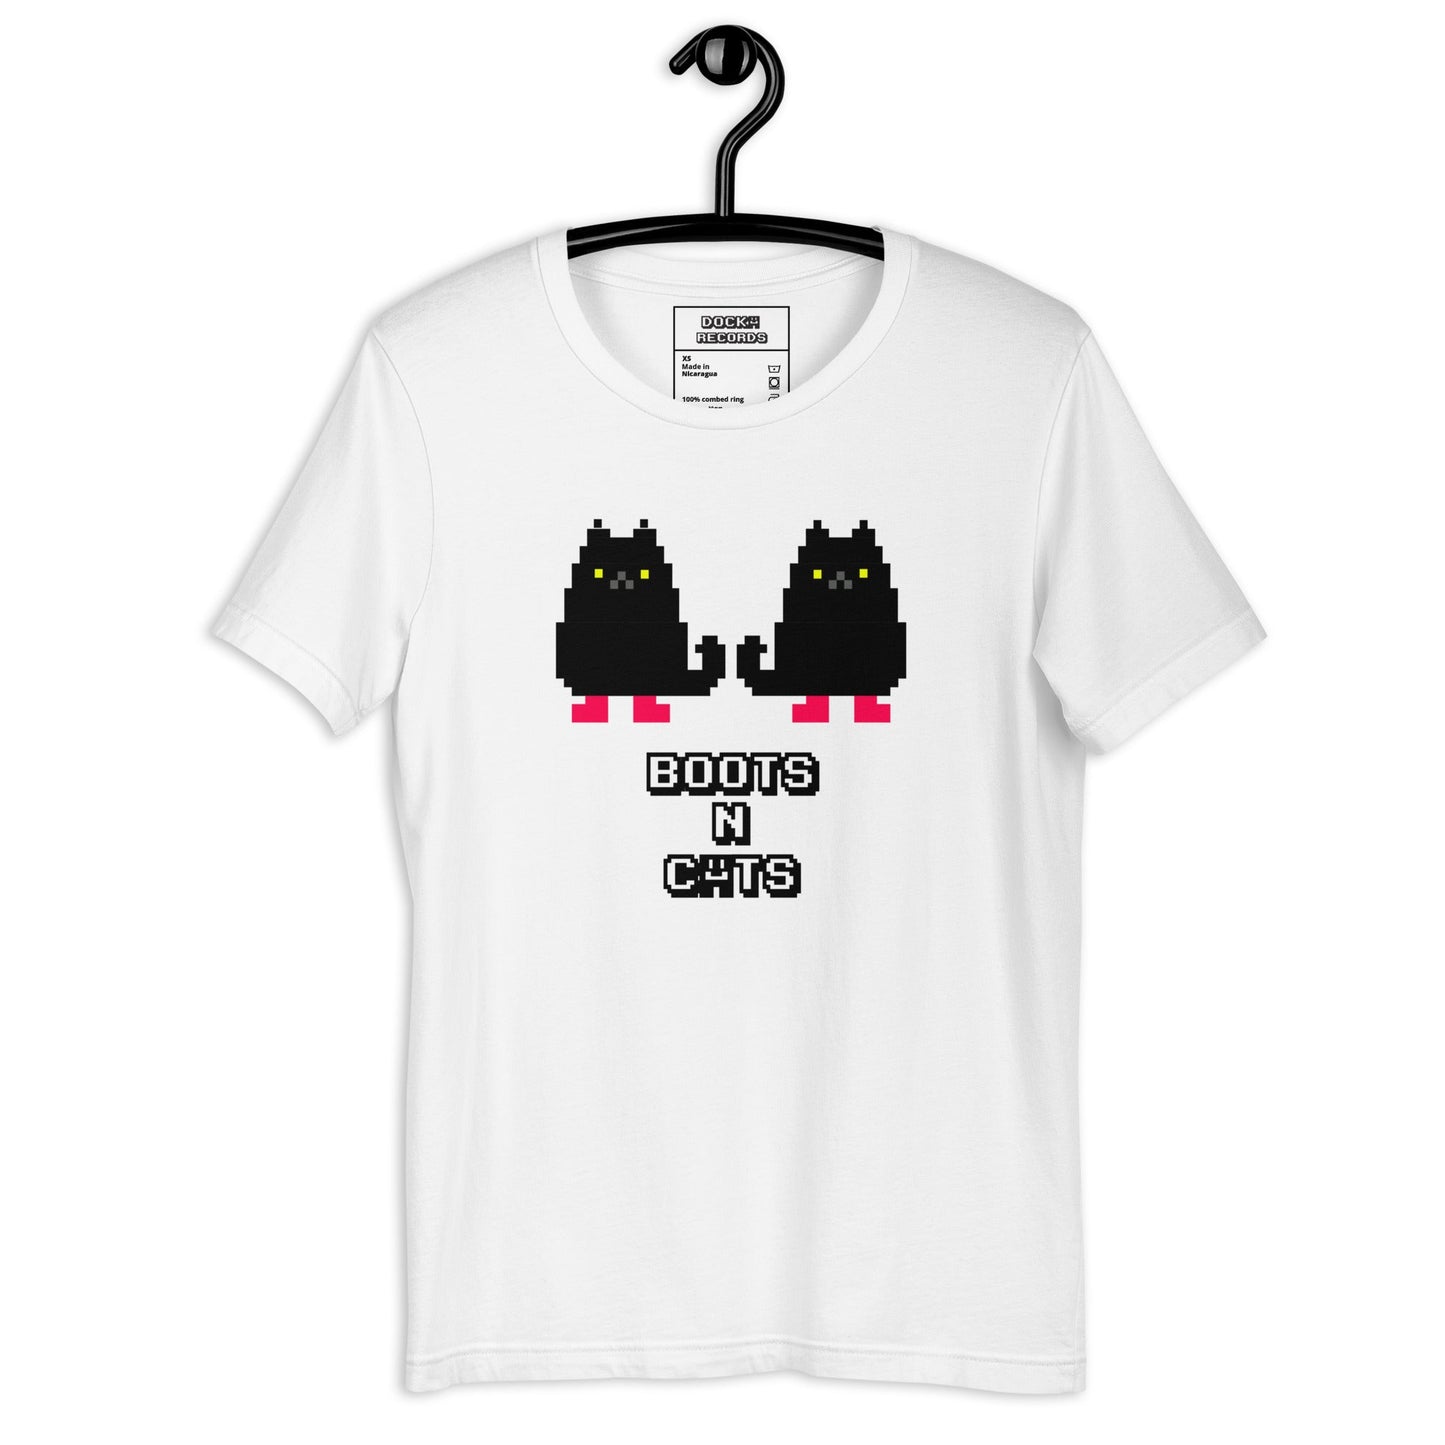 Docka Records Boots and Cats Unisex T-shirt - BeExtra! Apparel & More